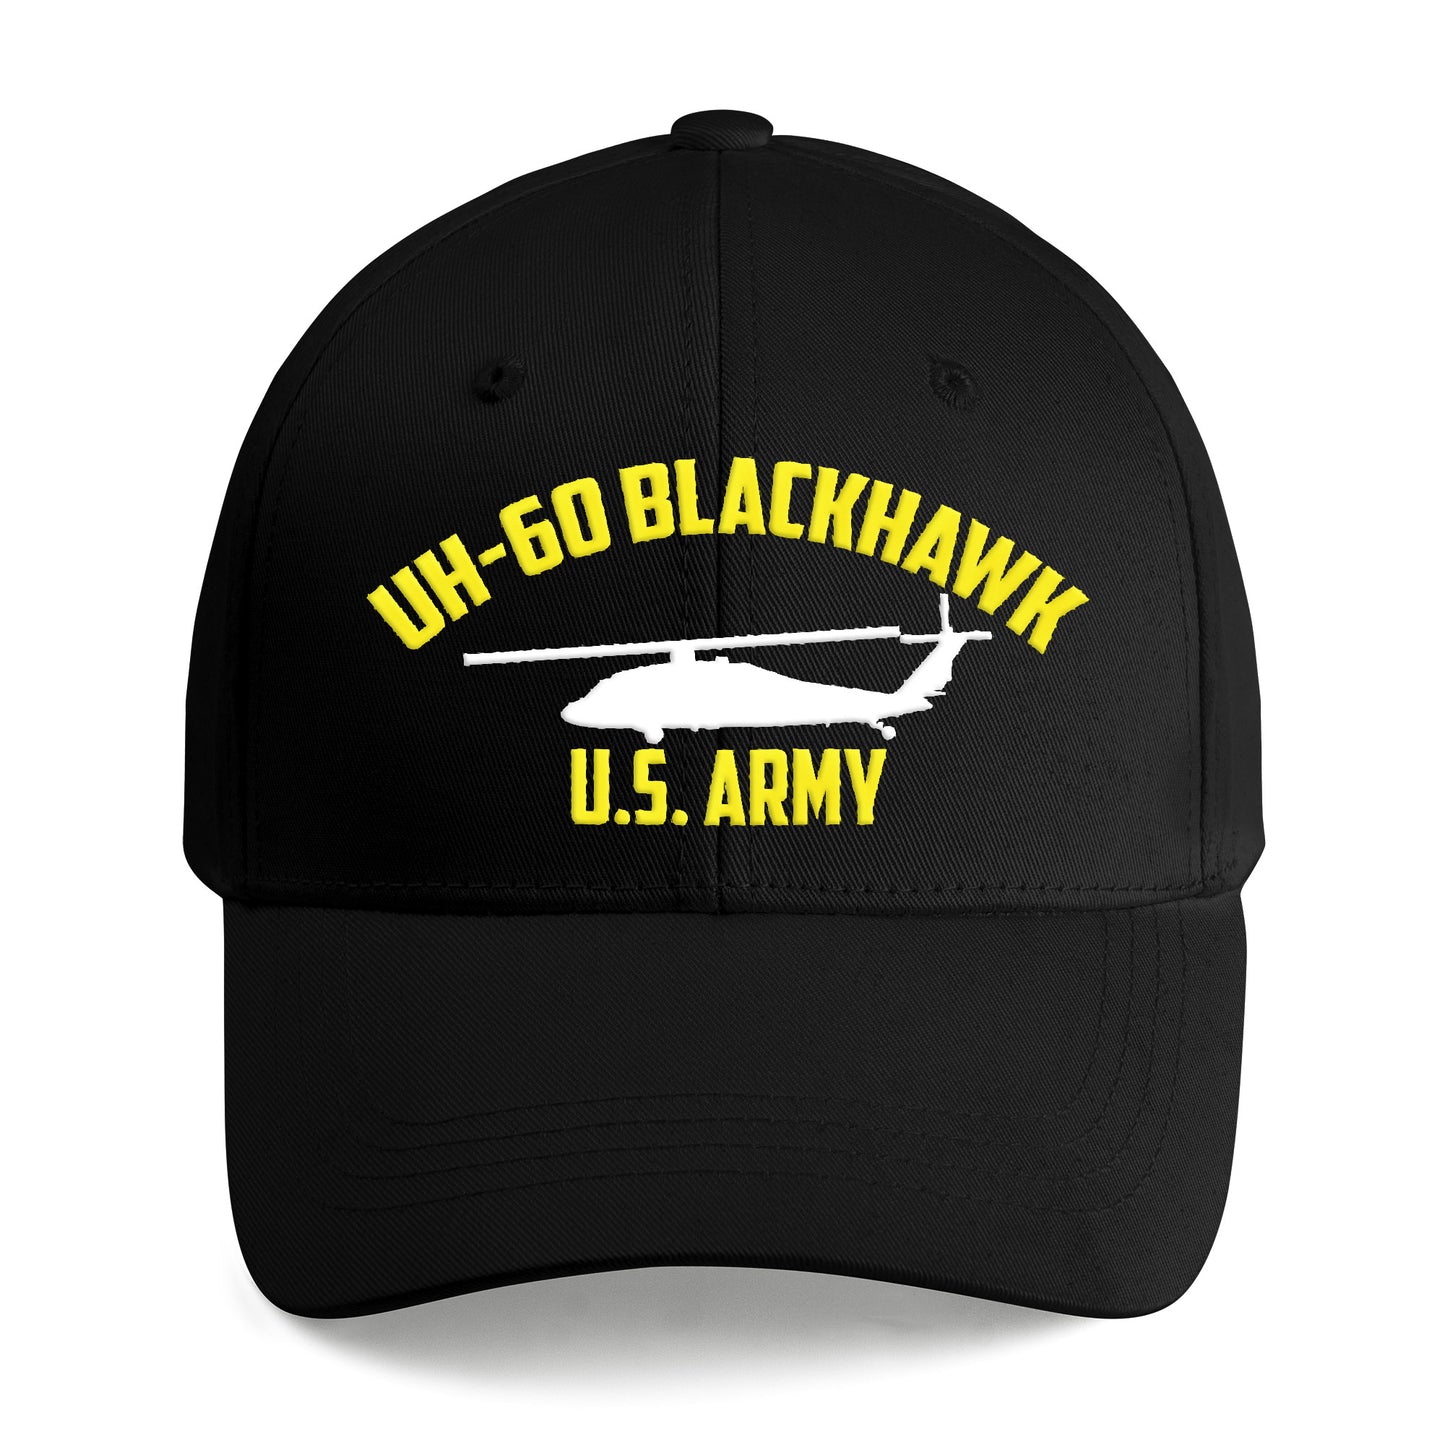 US Army UH-60 Black Hawk Helicopter Embroidered Cap